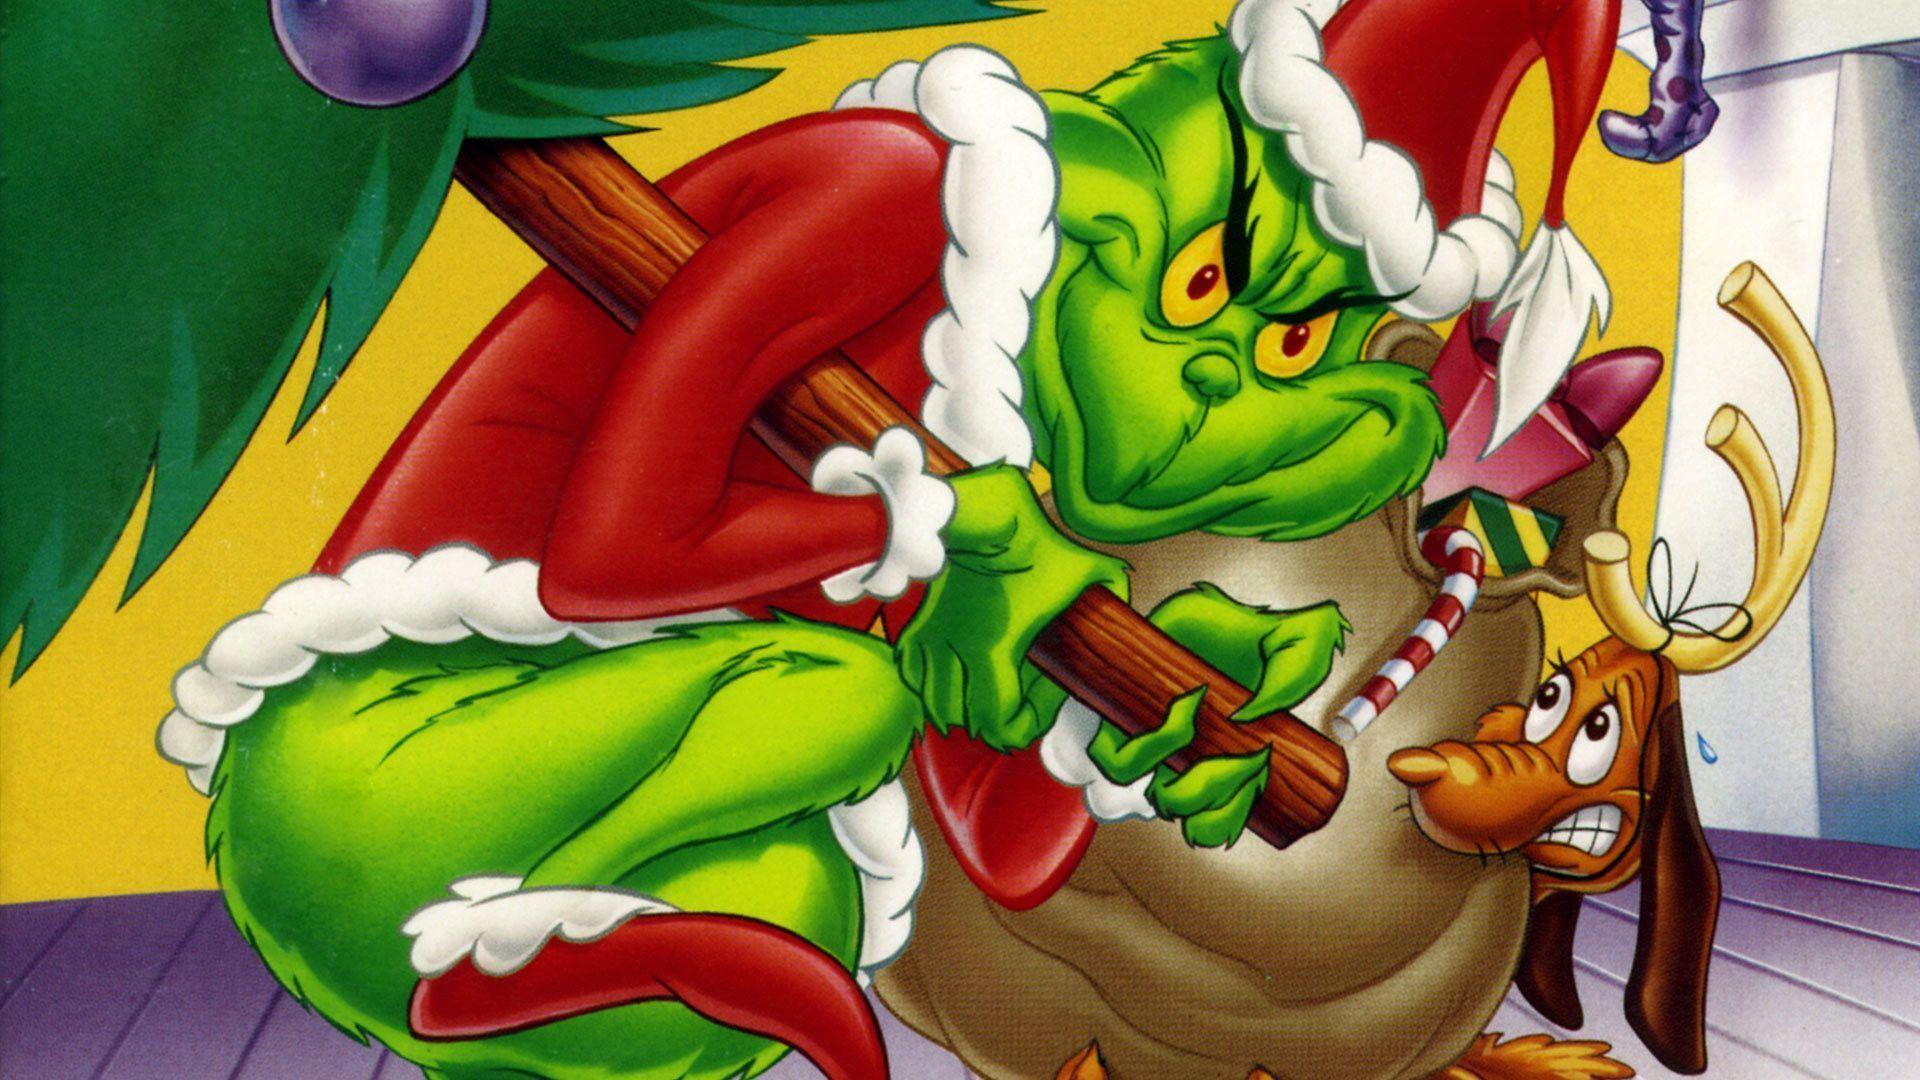 Xmas Stuff For > The Grinch Christmas Wallpaper